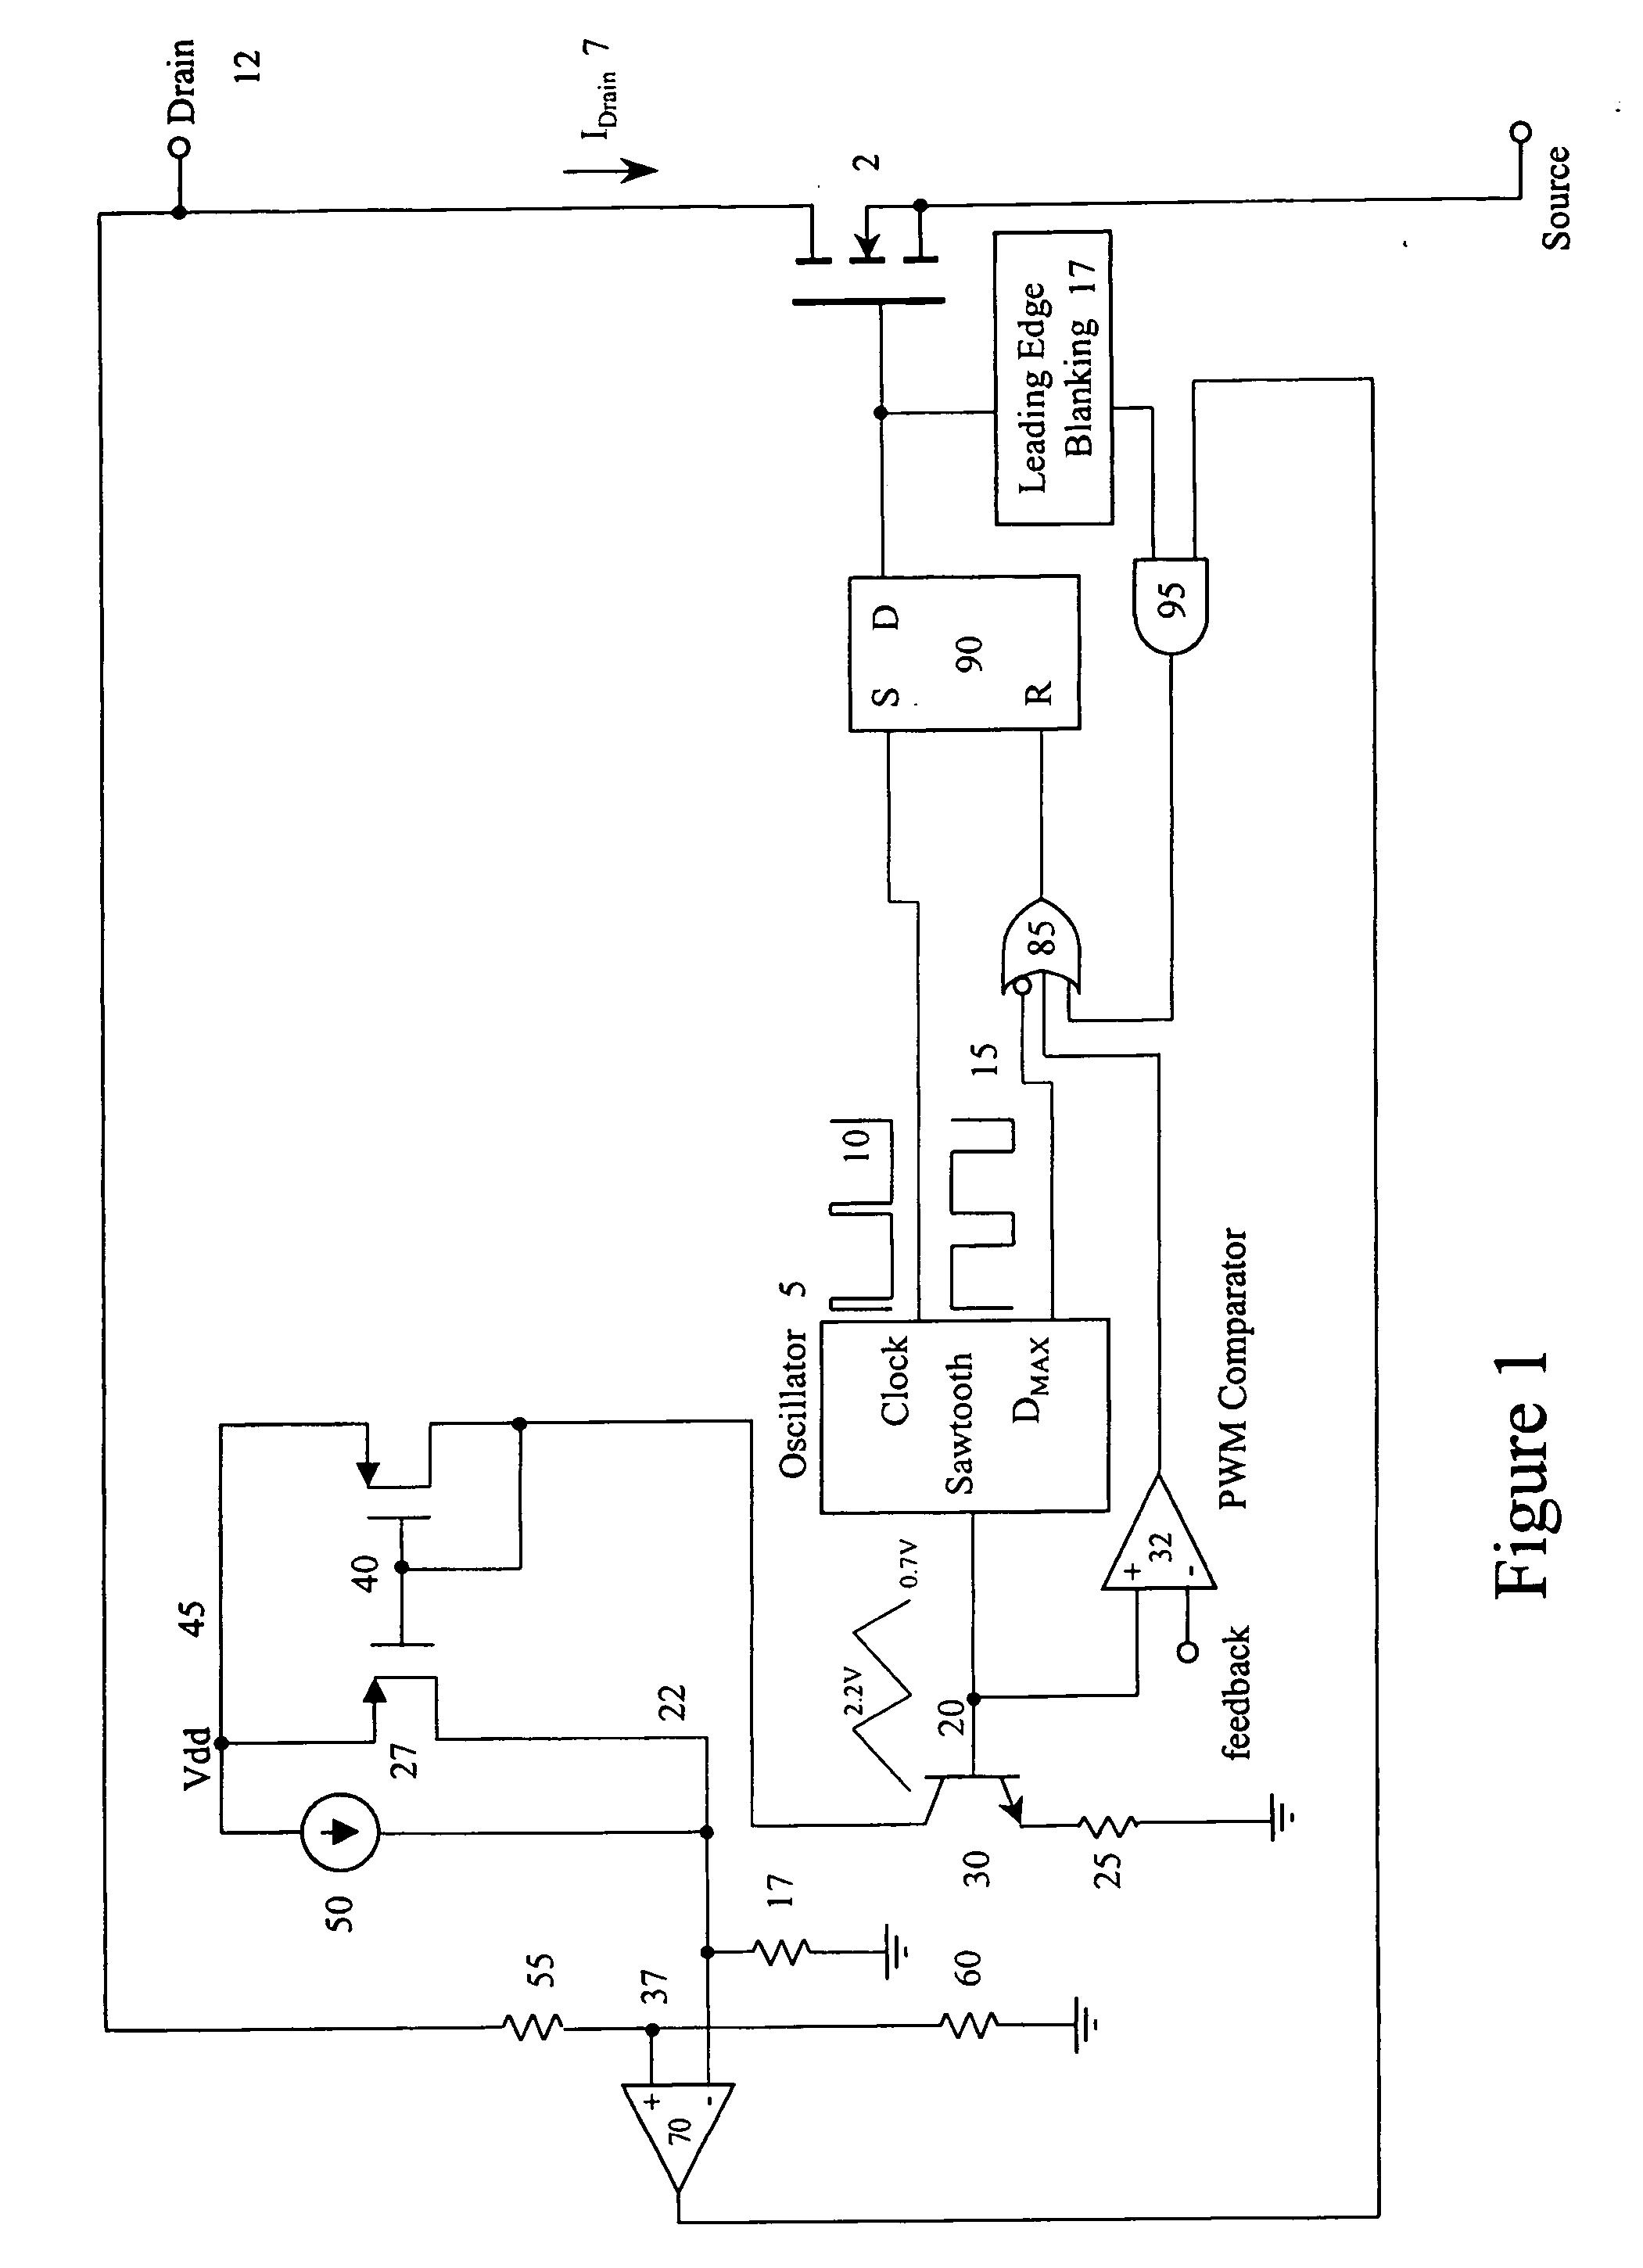 Method and apparatus for maintaining a constant load current with line voltage in a switch mode power supply